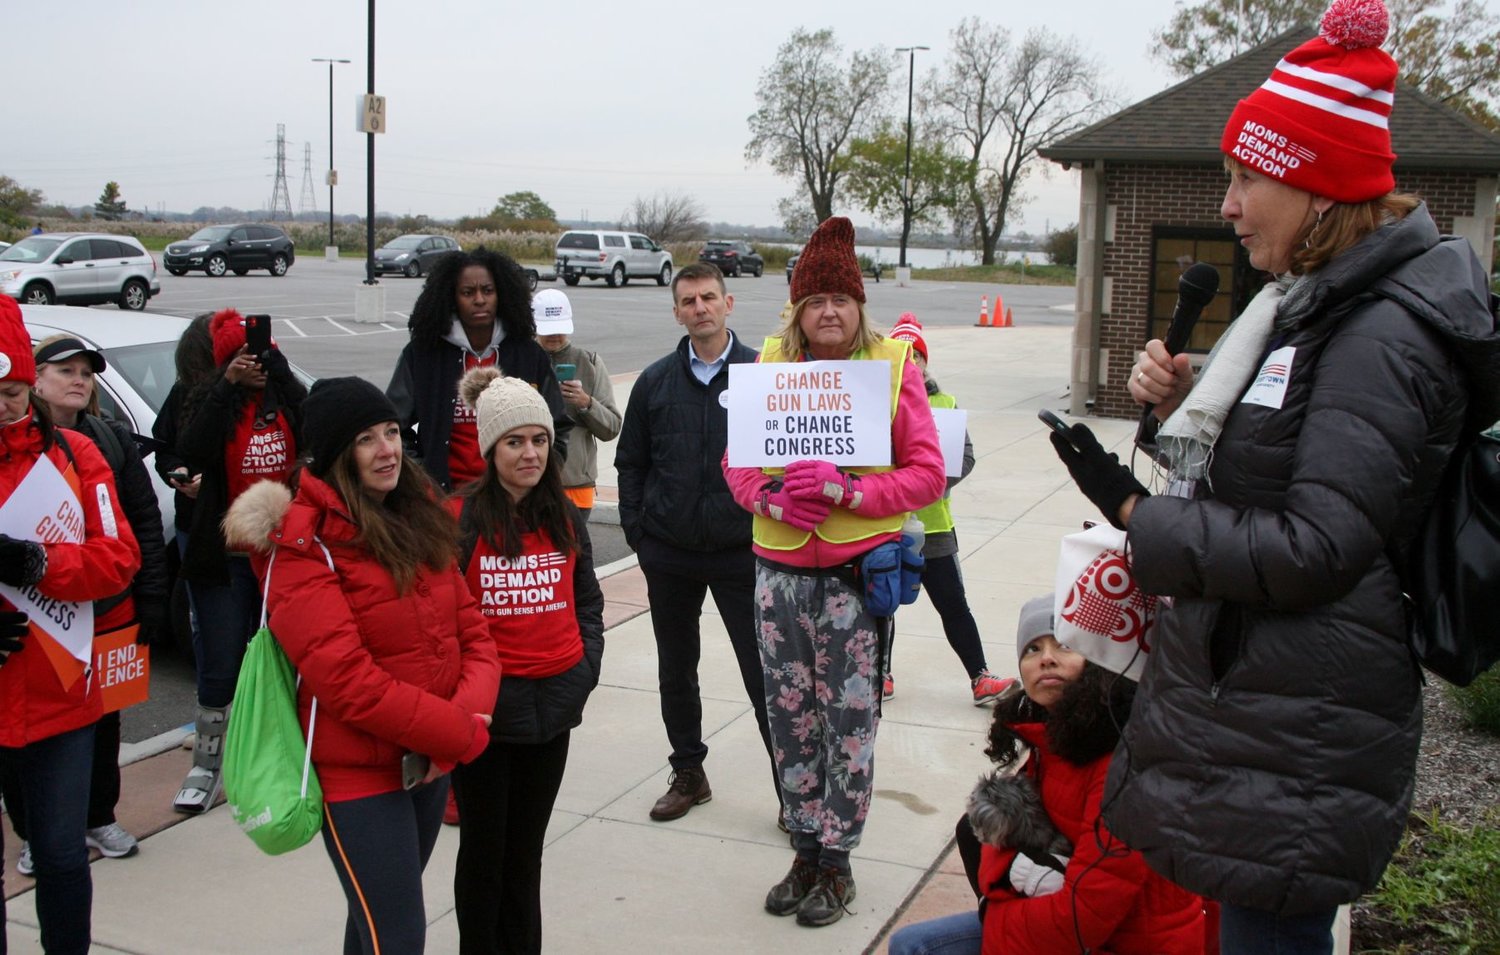 Sue Eleuterio, right, Indiana legislative lead for Moms Demand Action of Northwest Indiana, addresses participants in Saturday’s Moms Demand Action march from Hammond to Chicago to promote gun safety and related legislation.